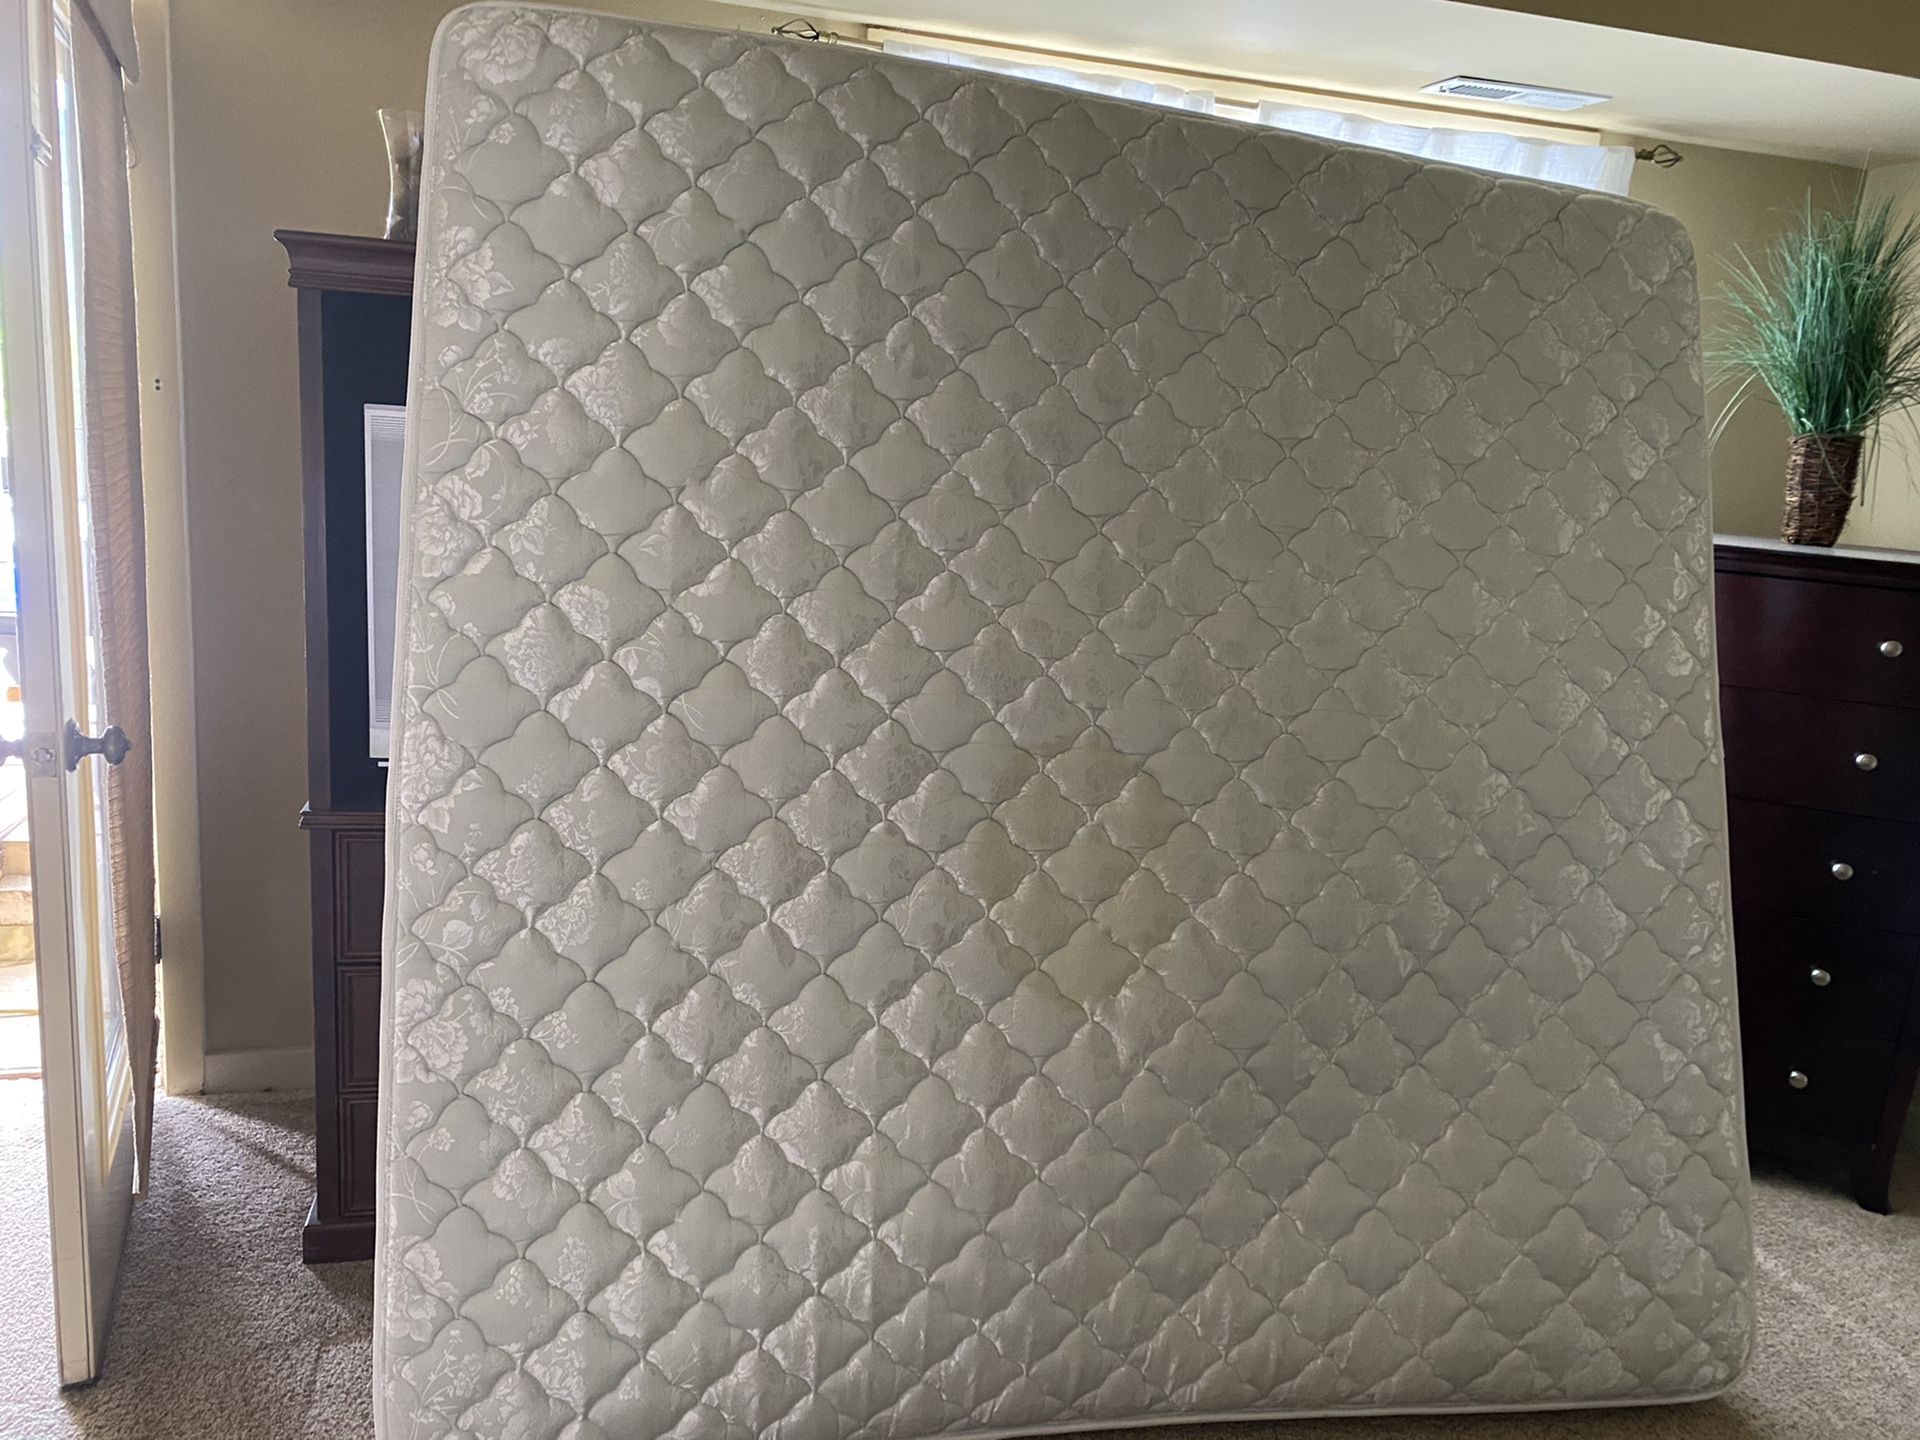 King size mattress in good condition.